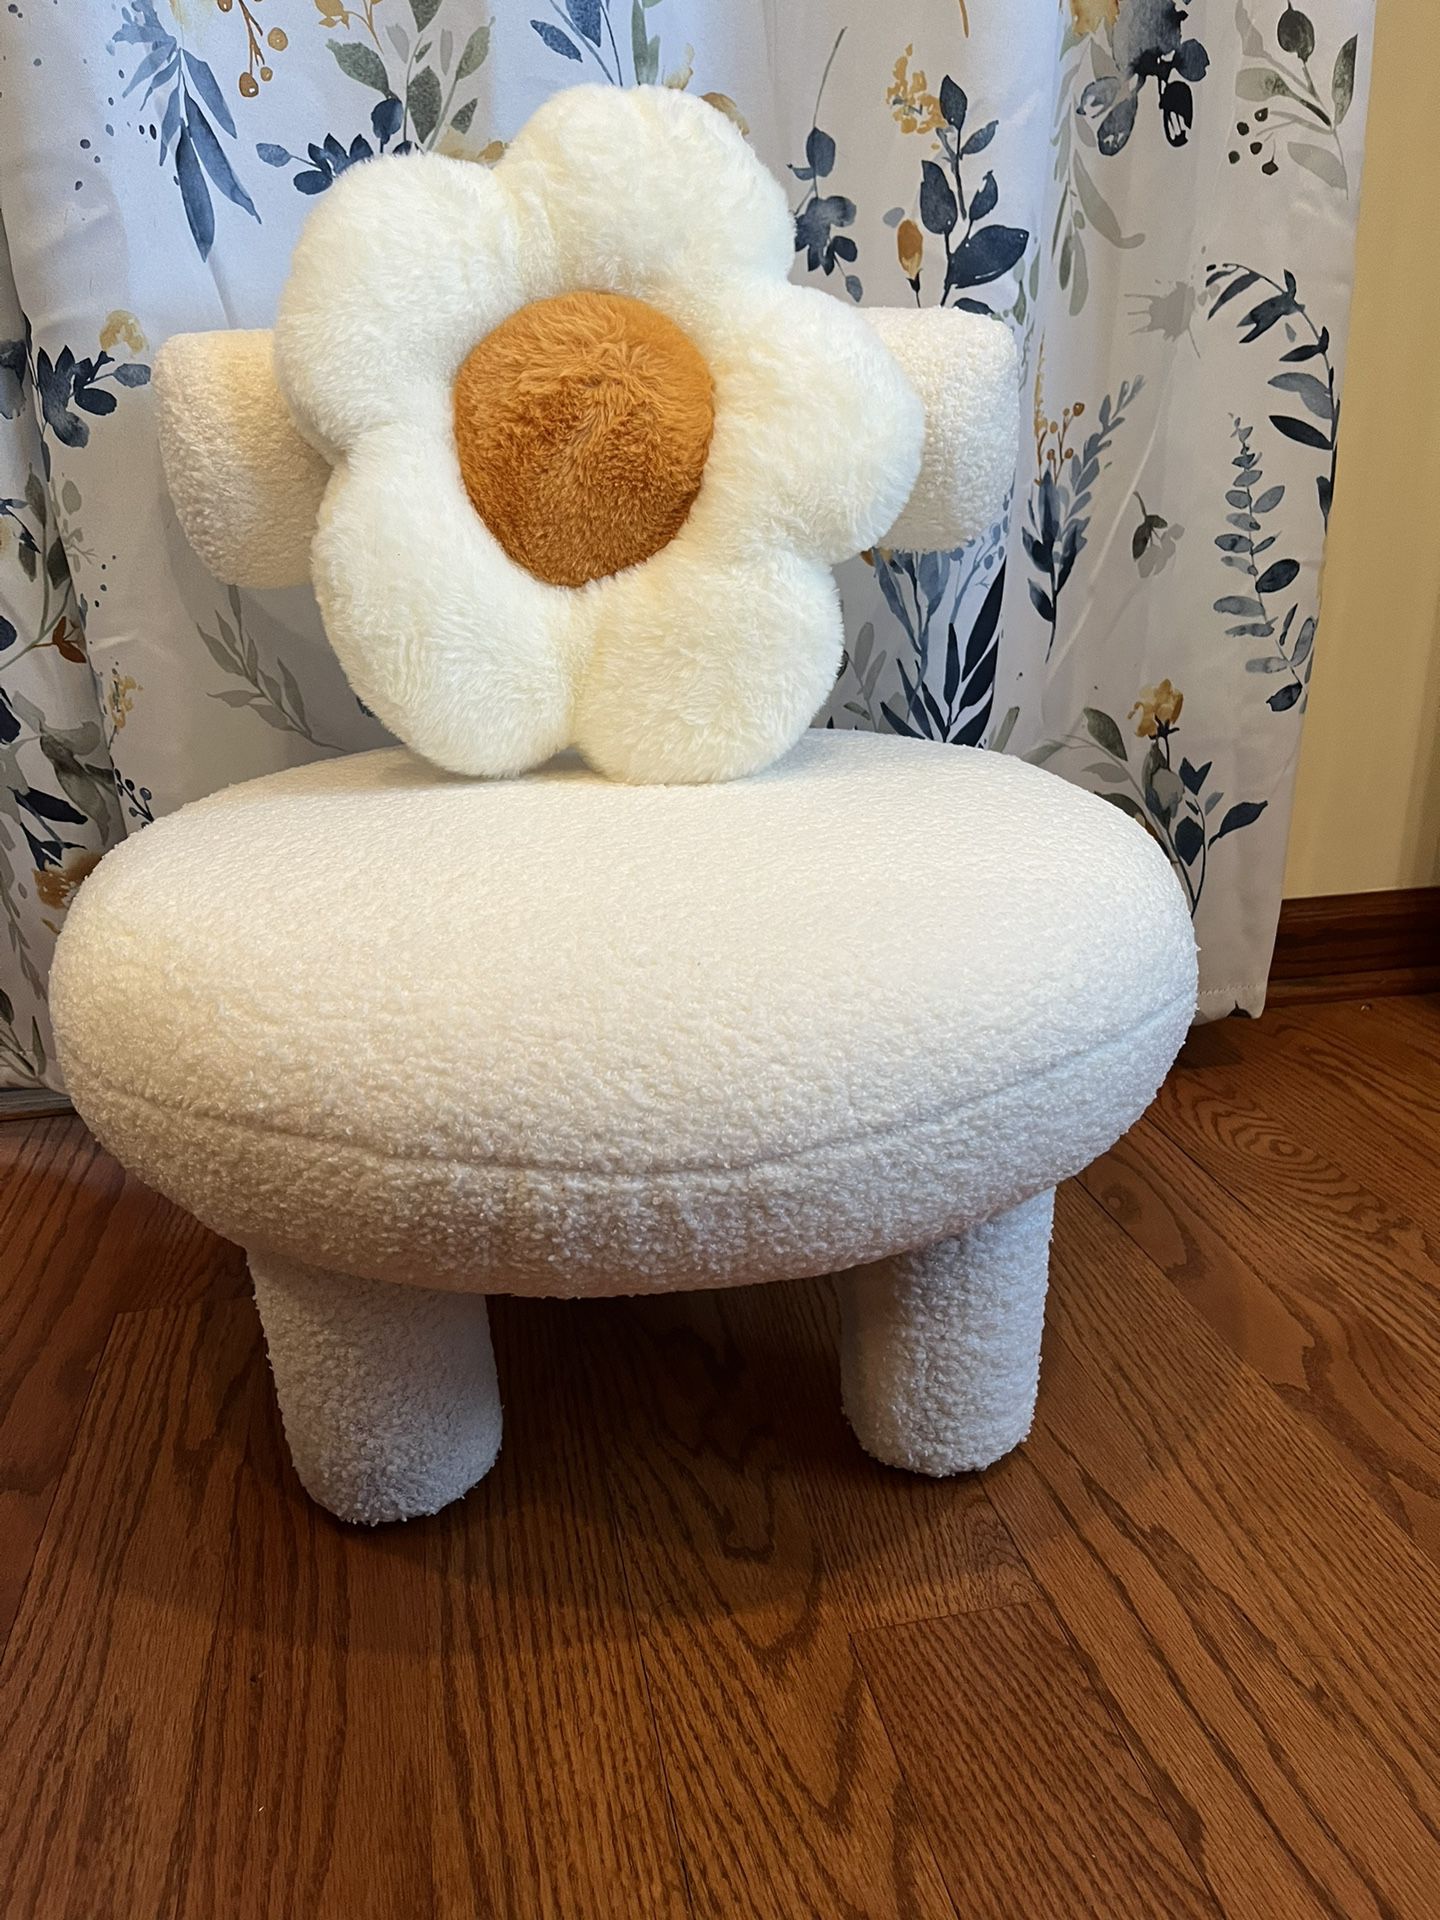 Kid’s Chair - Sherpa Stool With Flower Throw Pillow